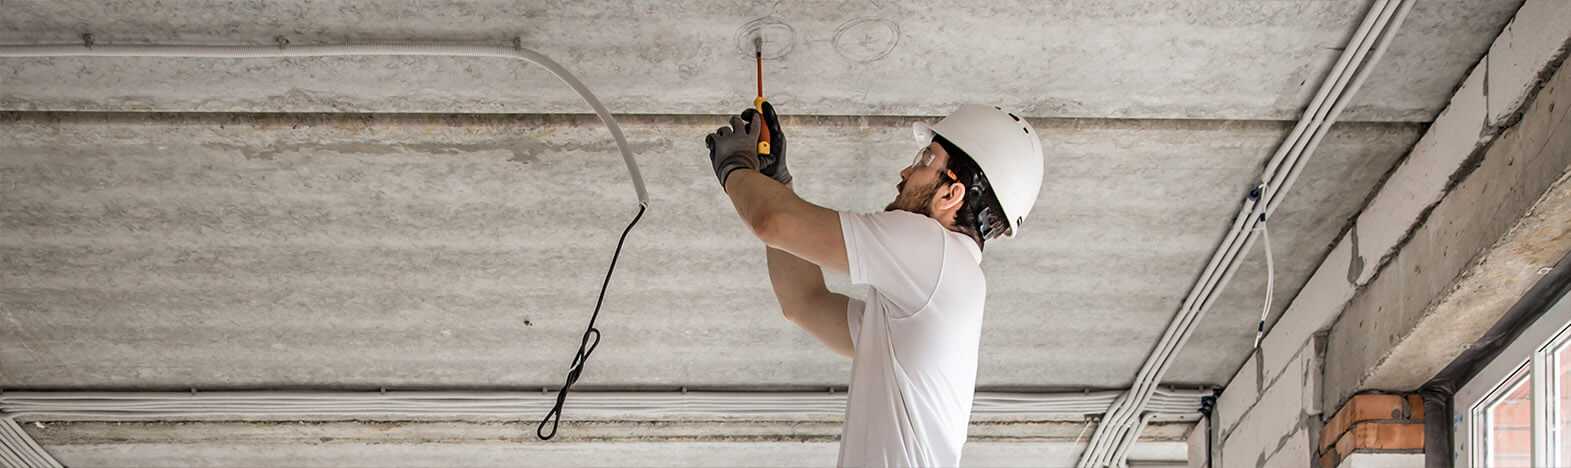 Kamloops, Sahali and Aberdeen Electrical Contractor